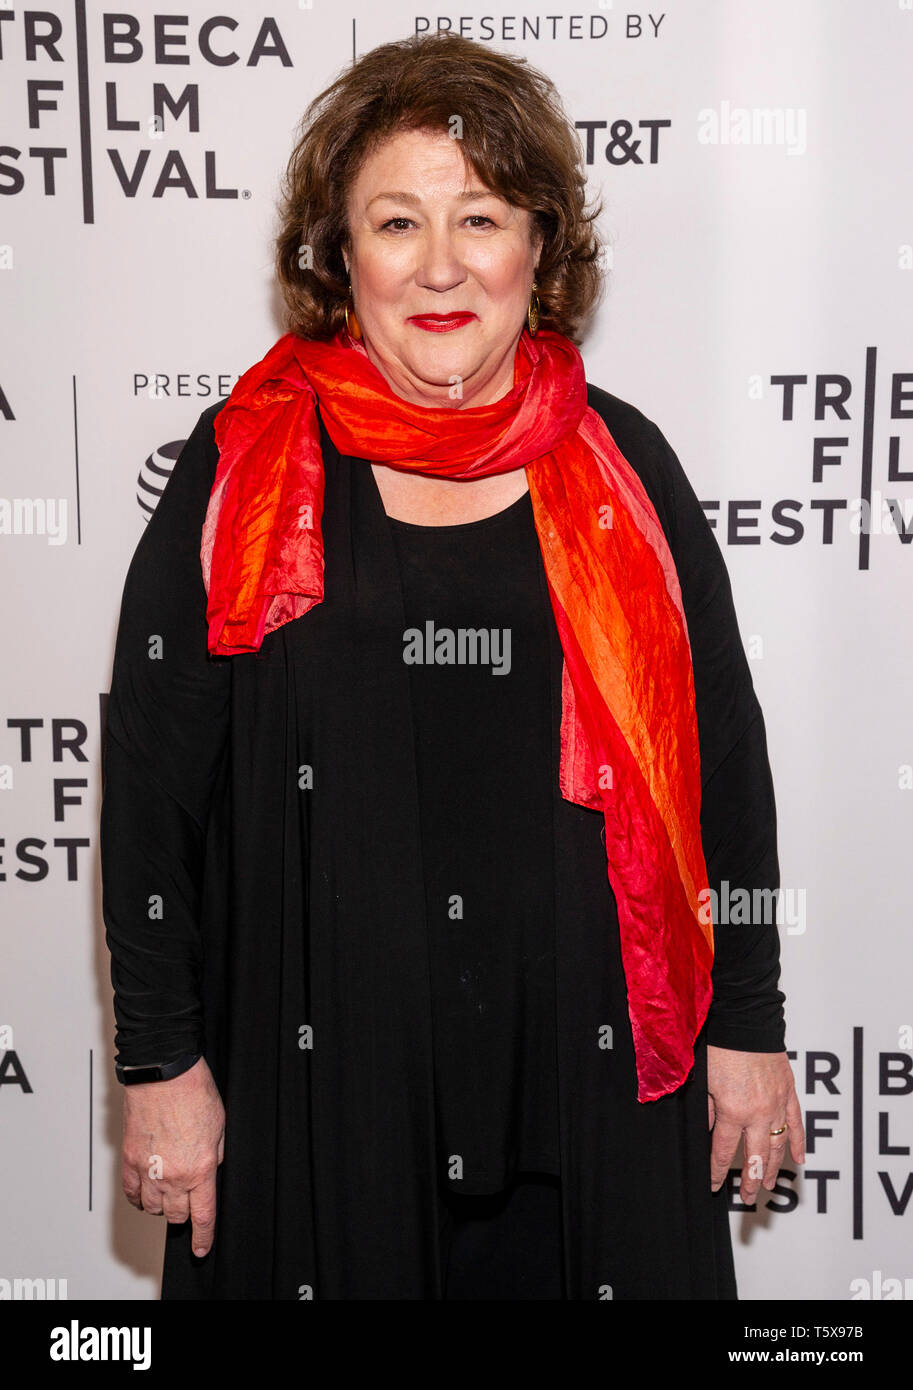 New York, NY - April 26, 2019: Margo Martindale attends the 'Blow The Man Down' screening during the 2019 Tribeca Film Festival at SVA Theater Stock Photo